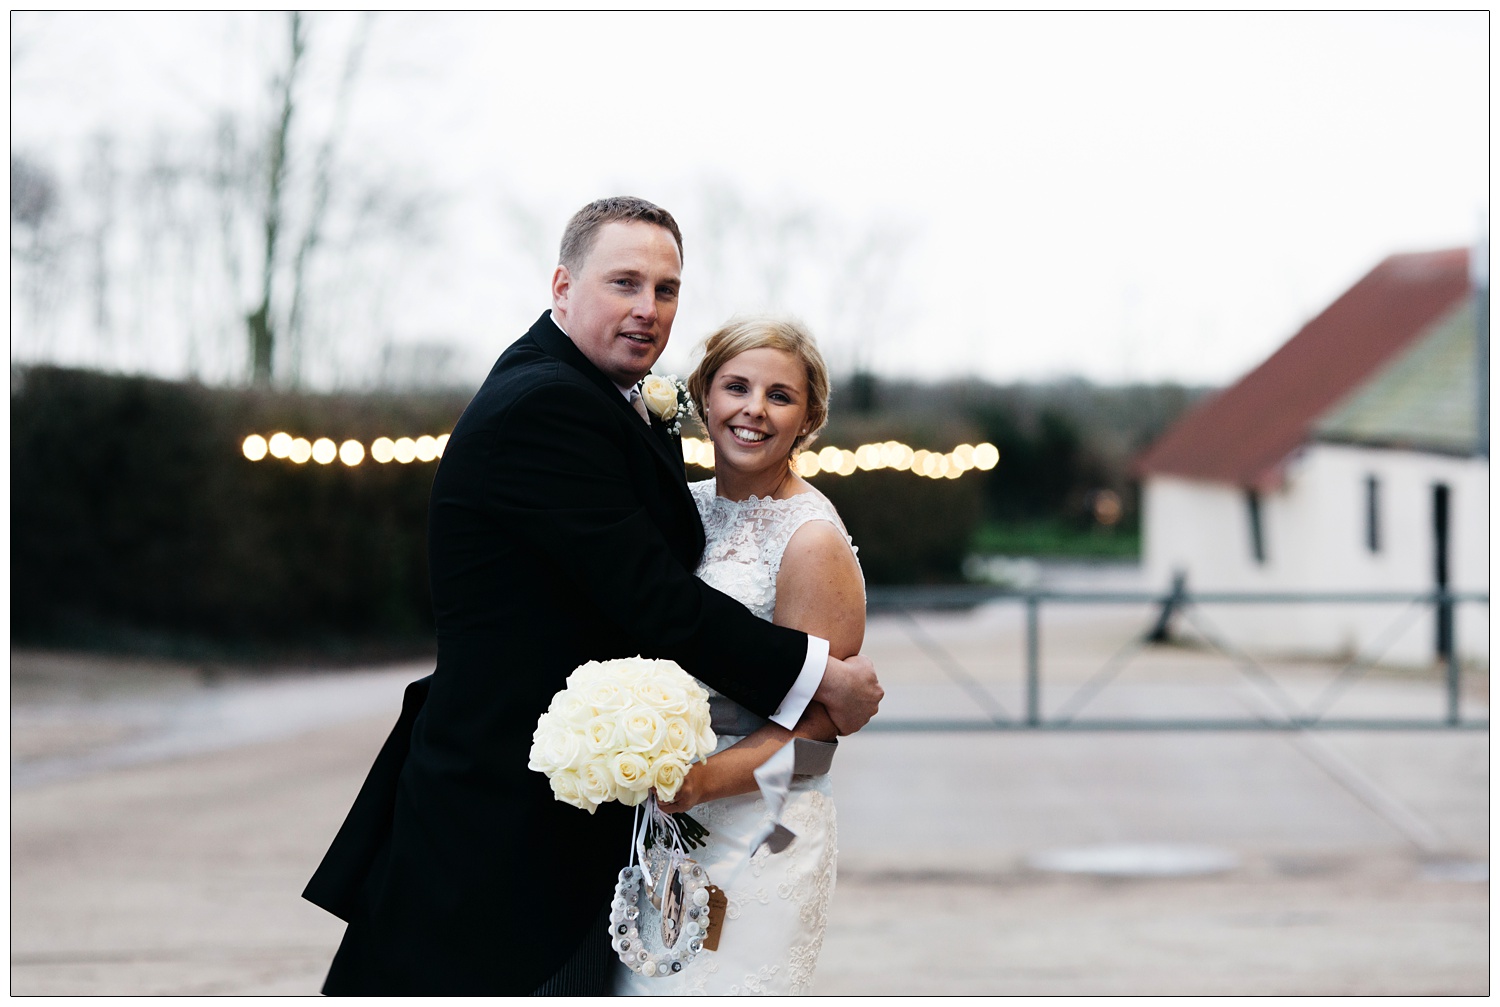 Groom hugs his bride on their chilly wedding day in January. There is a string of lights behind them on the farm.